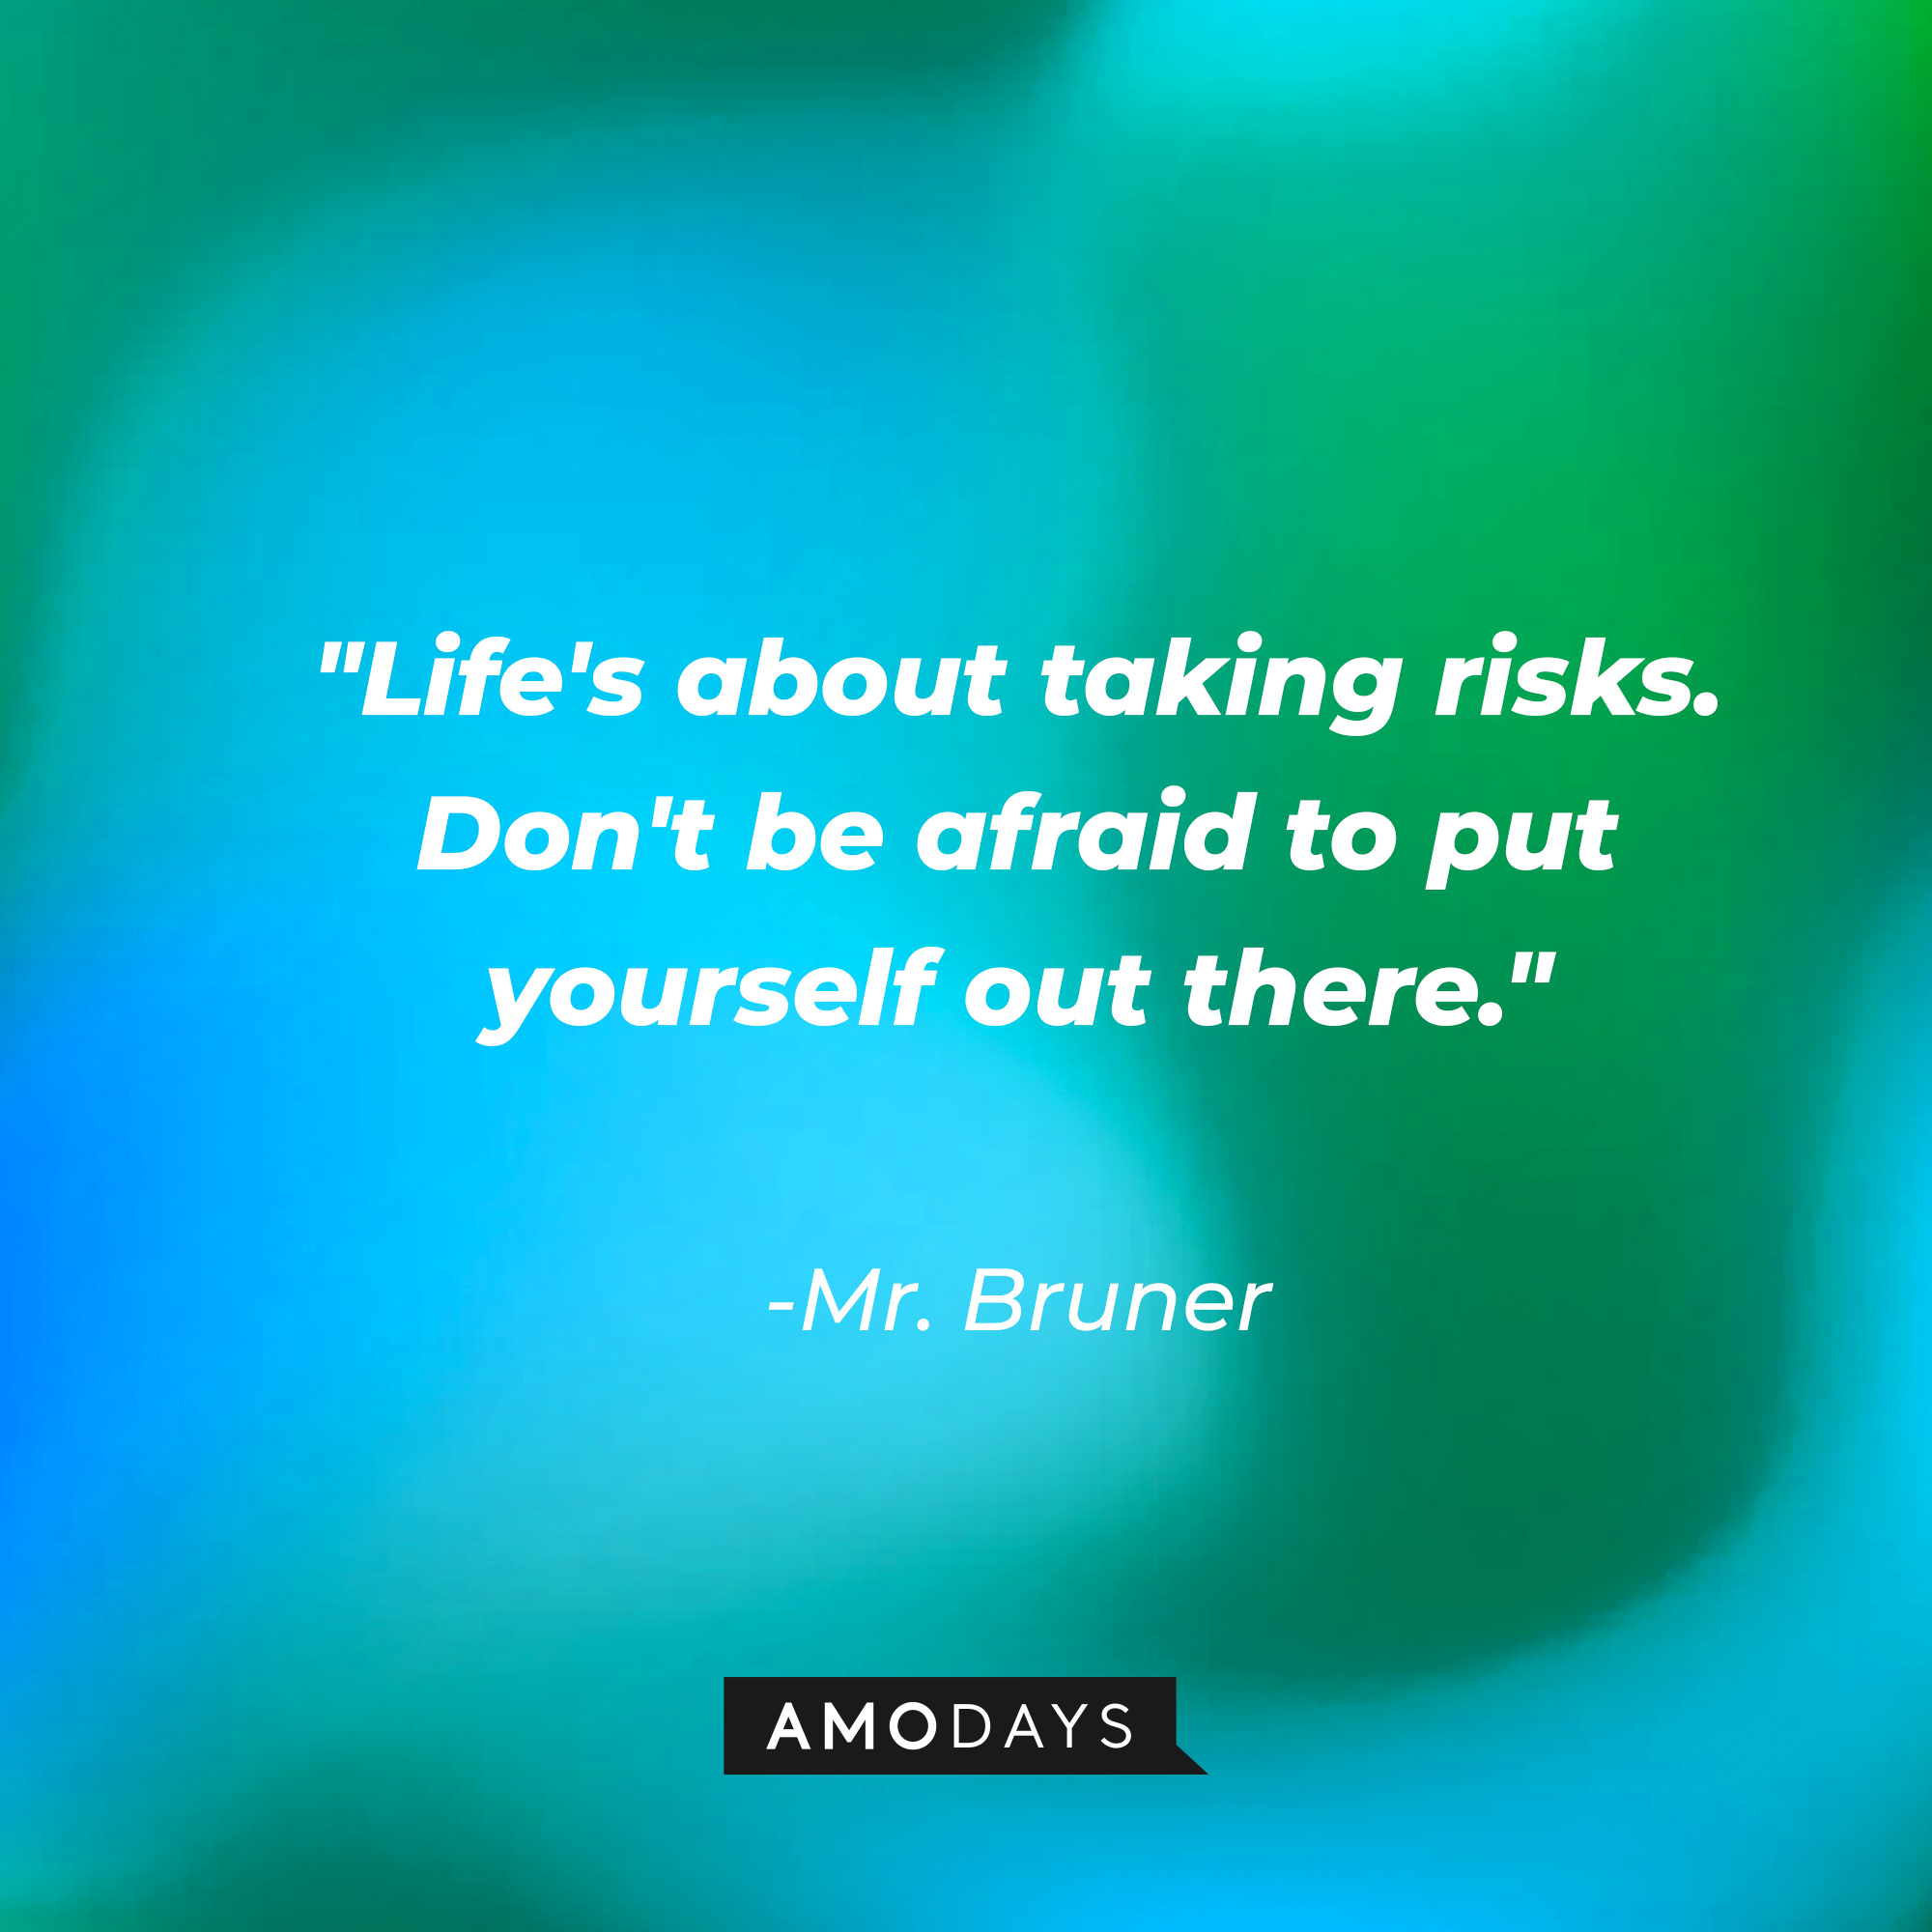 Mr. Bruner's quote: "Life's about taking risks. Don't be afraid to put yourself out there." | Source: AmoDays